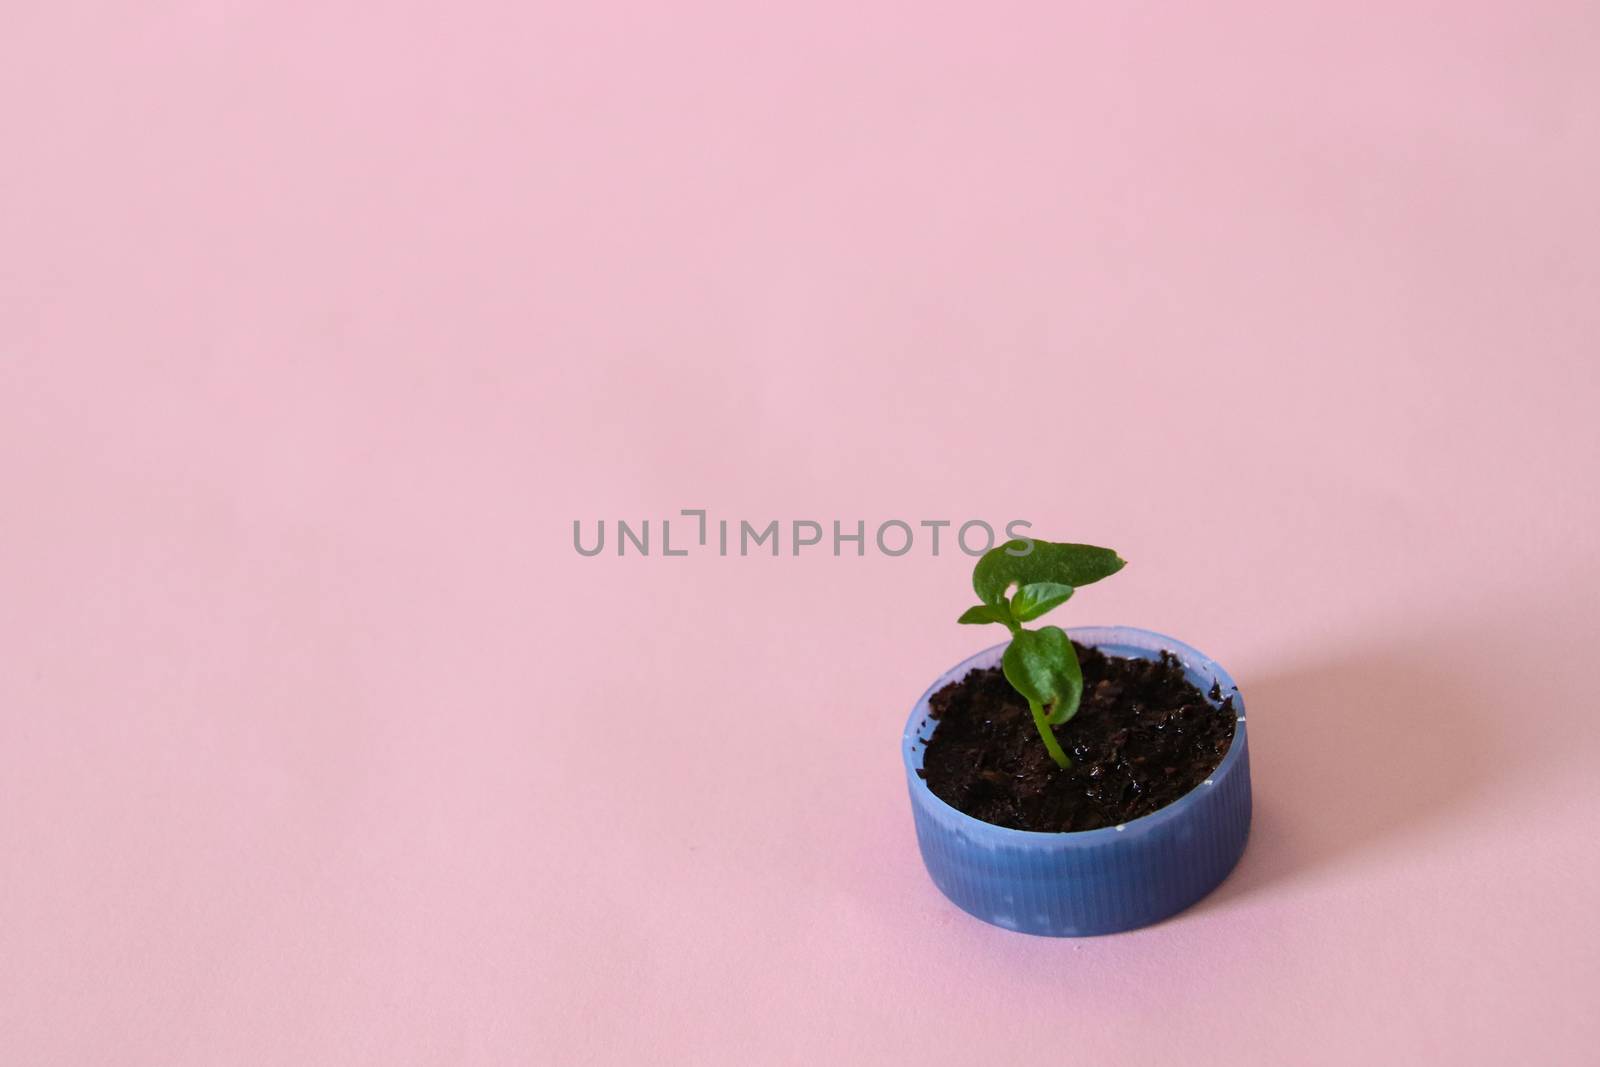 Conceptual still life showing hope for nature and the planet